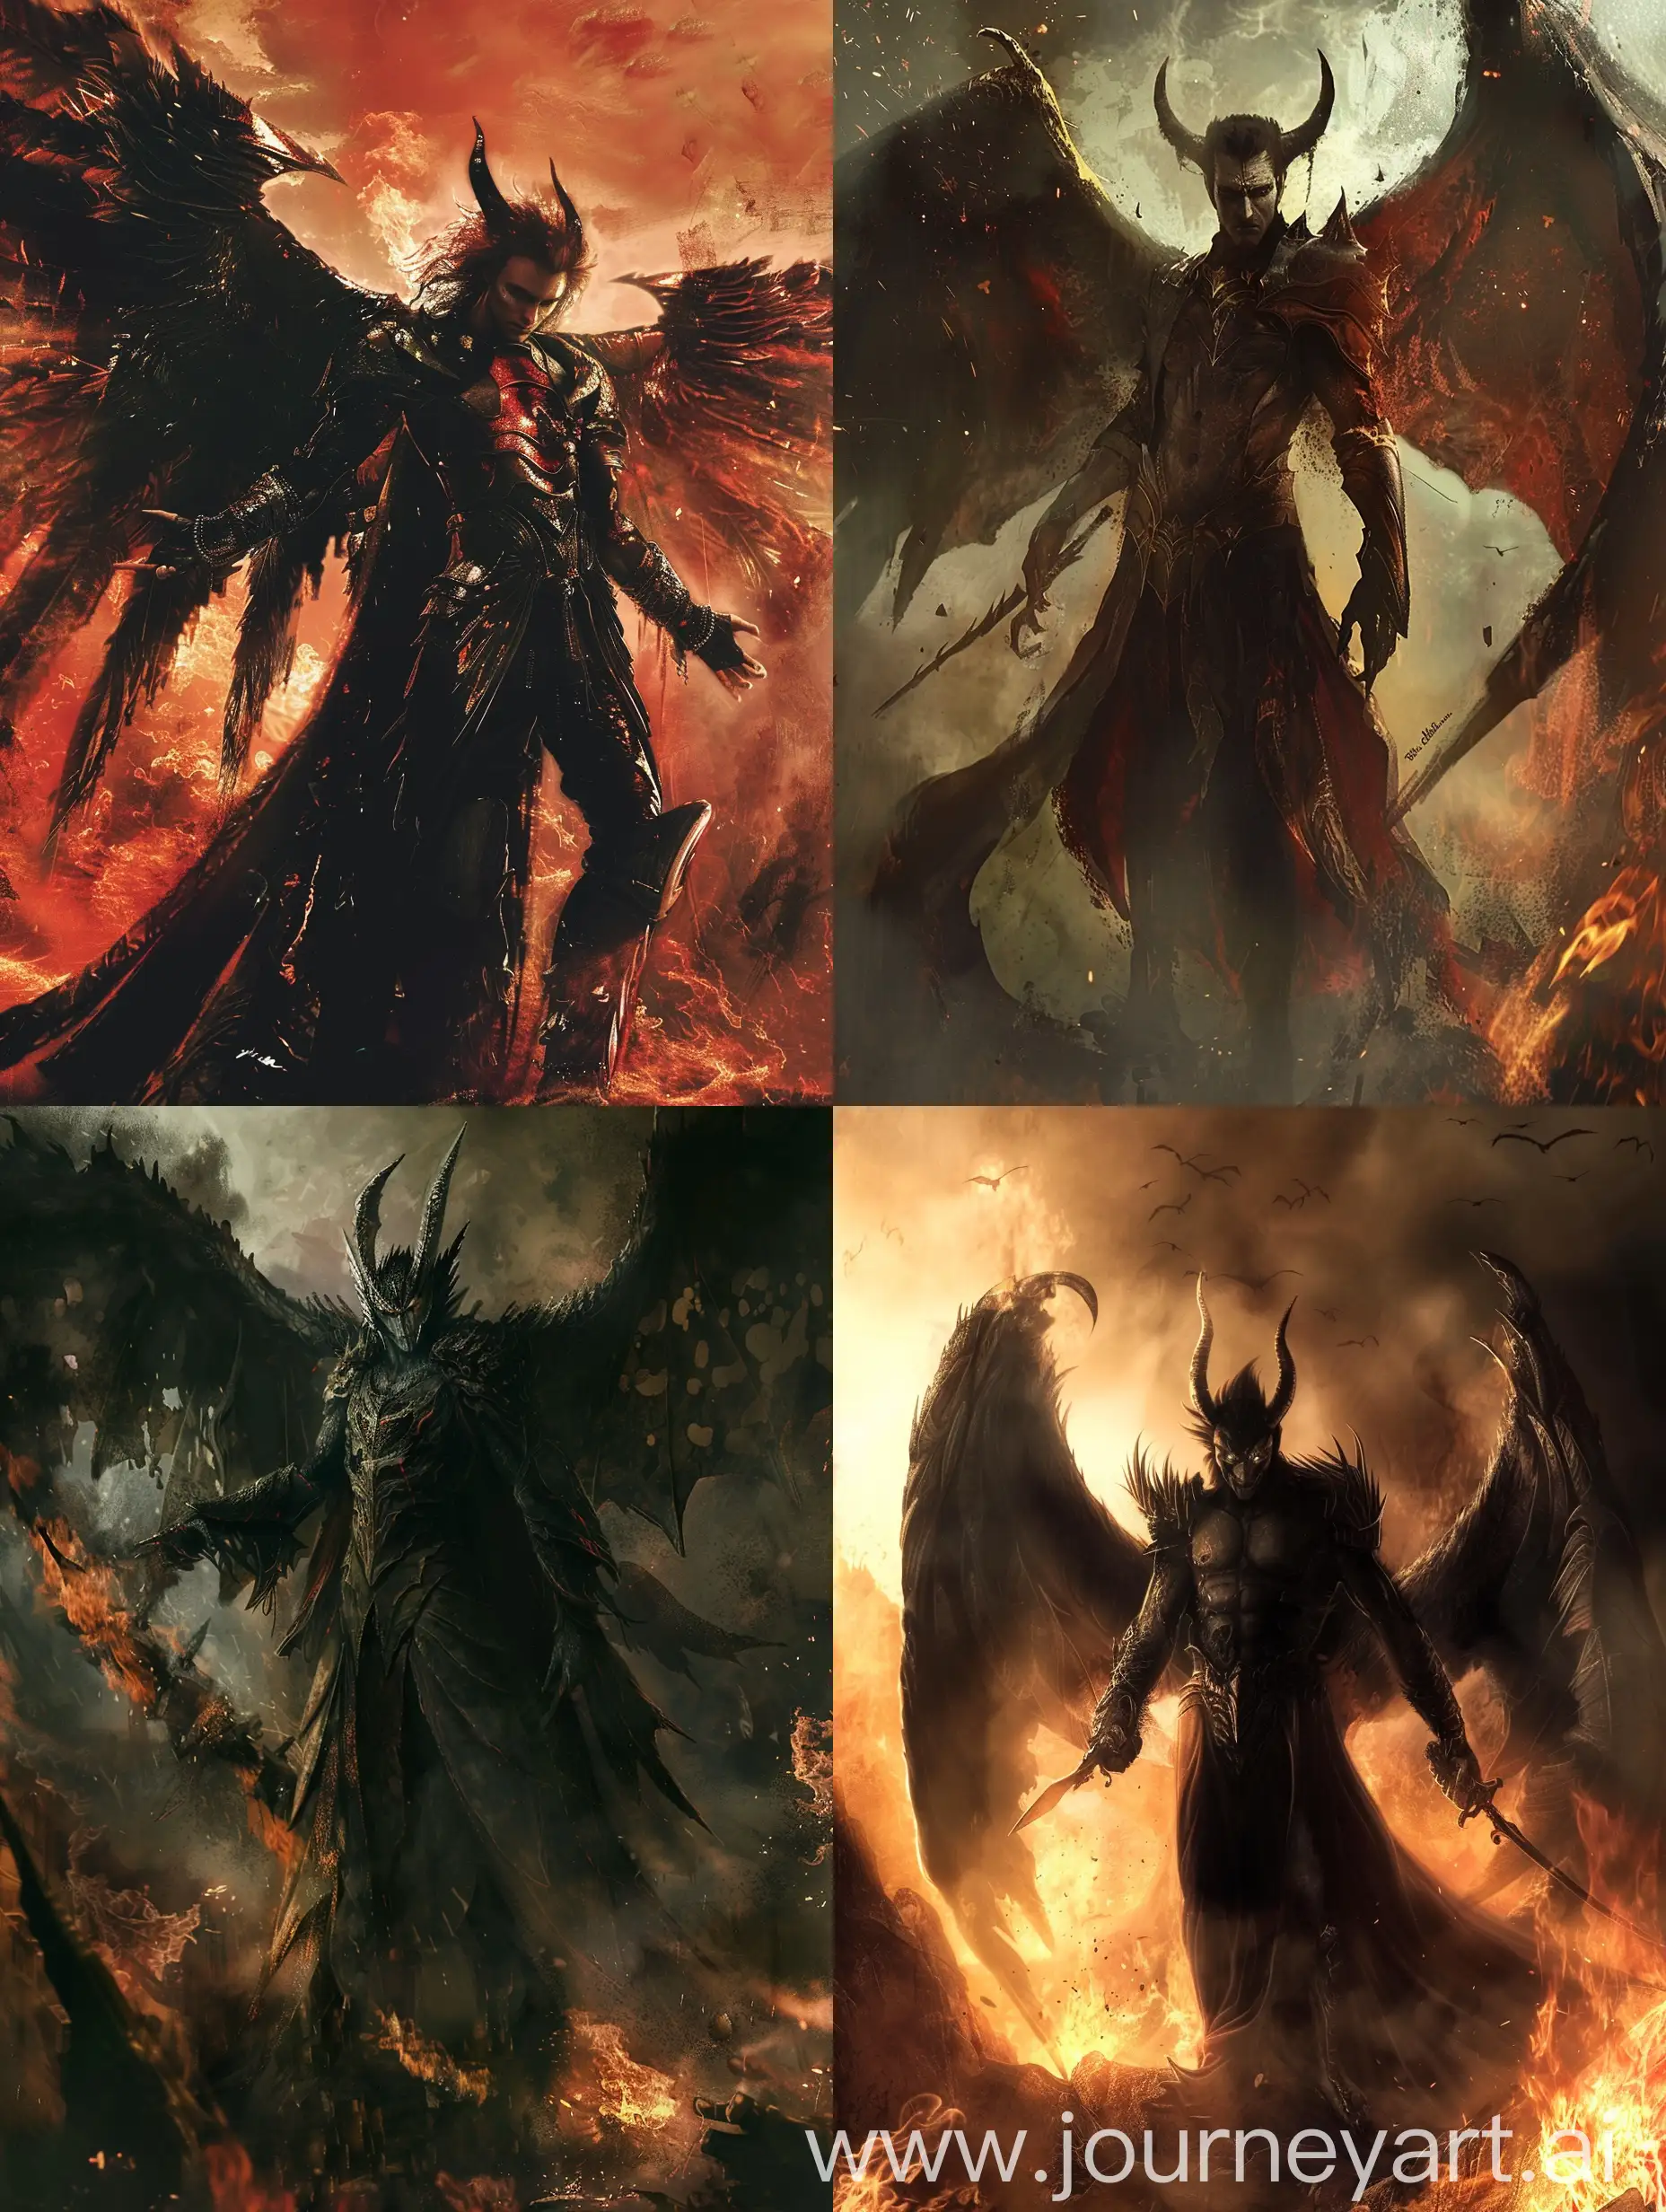 A dark and brooding Lucifer stands tall, his wings spread wide as he surveys his kingdom of fire and brimstone